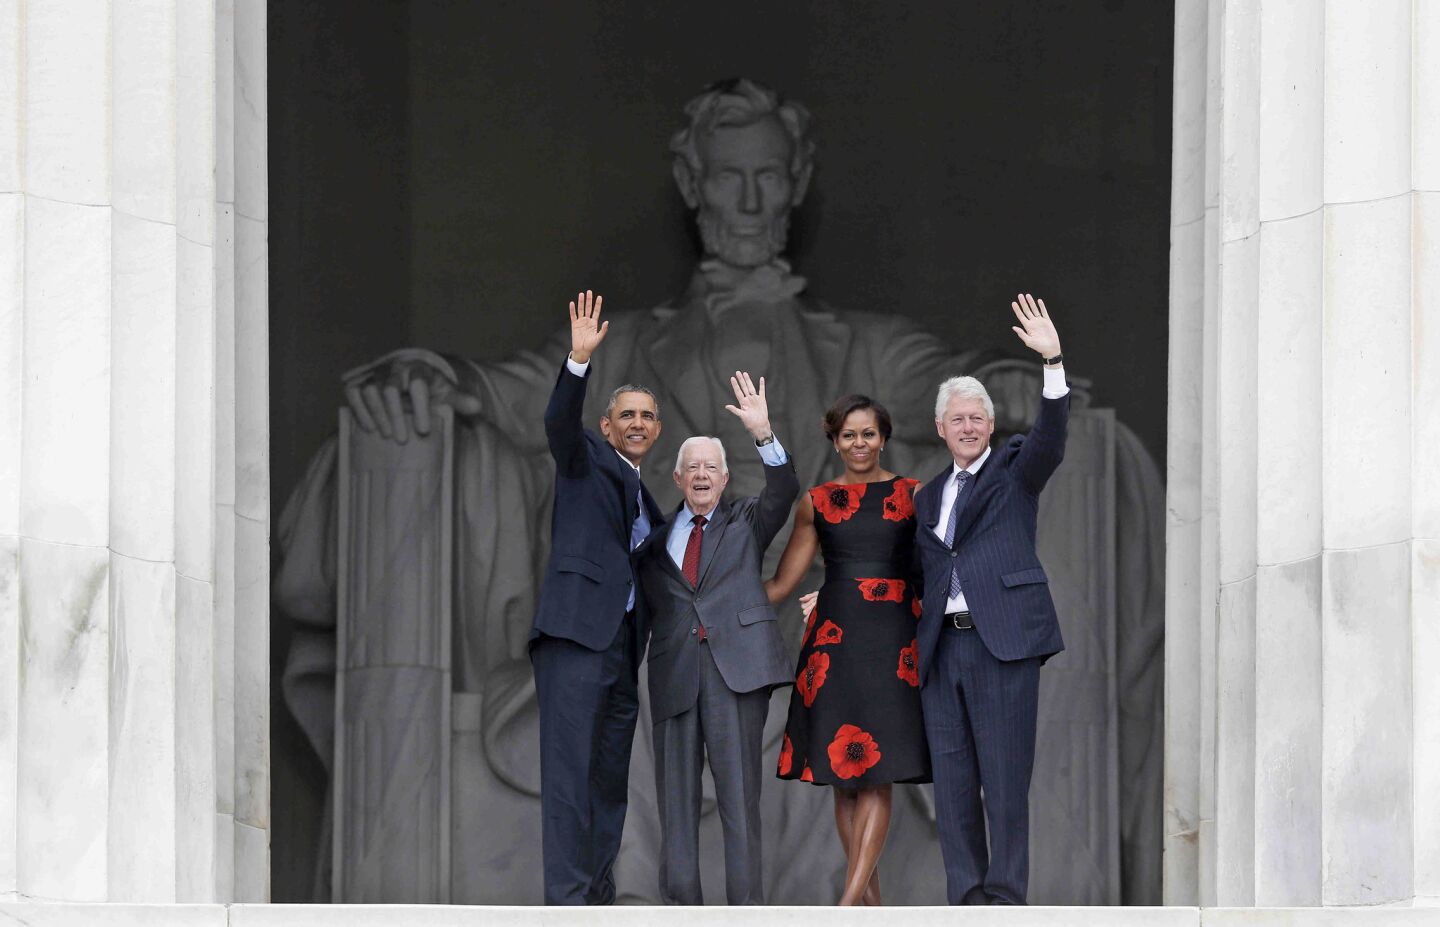 President Obama, first lady Michelle Obama and former presidents Jimmy Carter and Bill Clinton wave as they leave 50th anniversary celebration of the March on Washington.